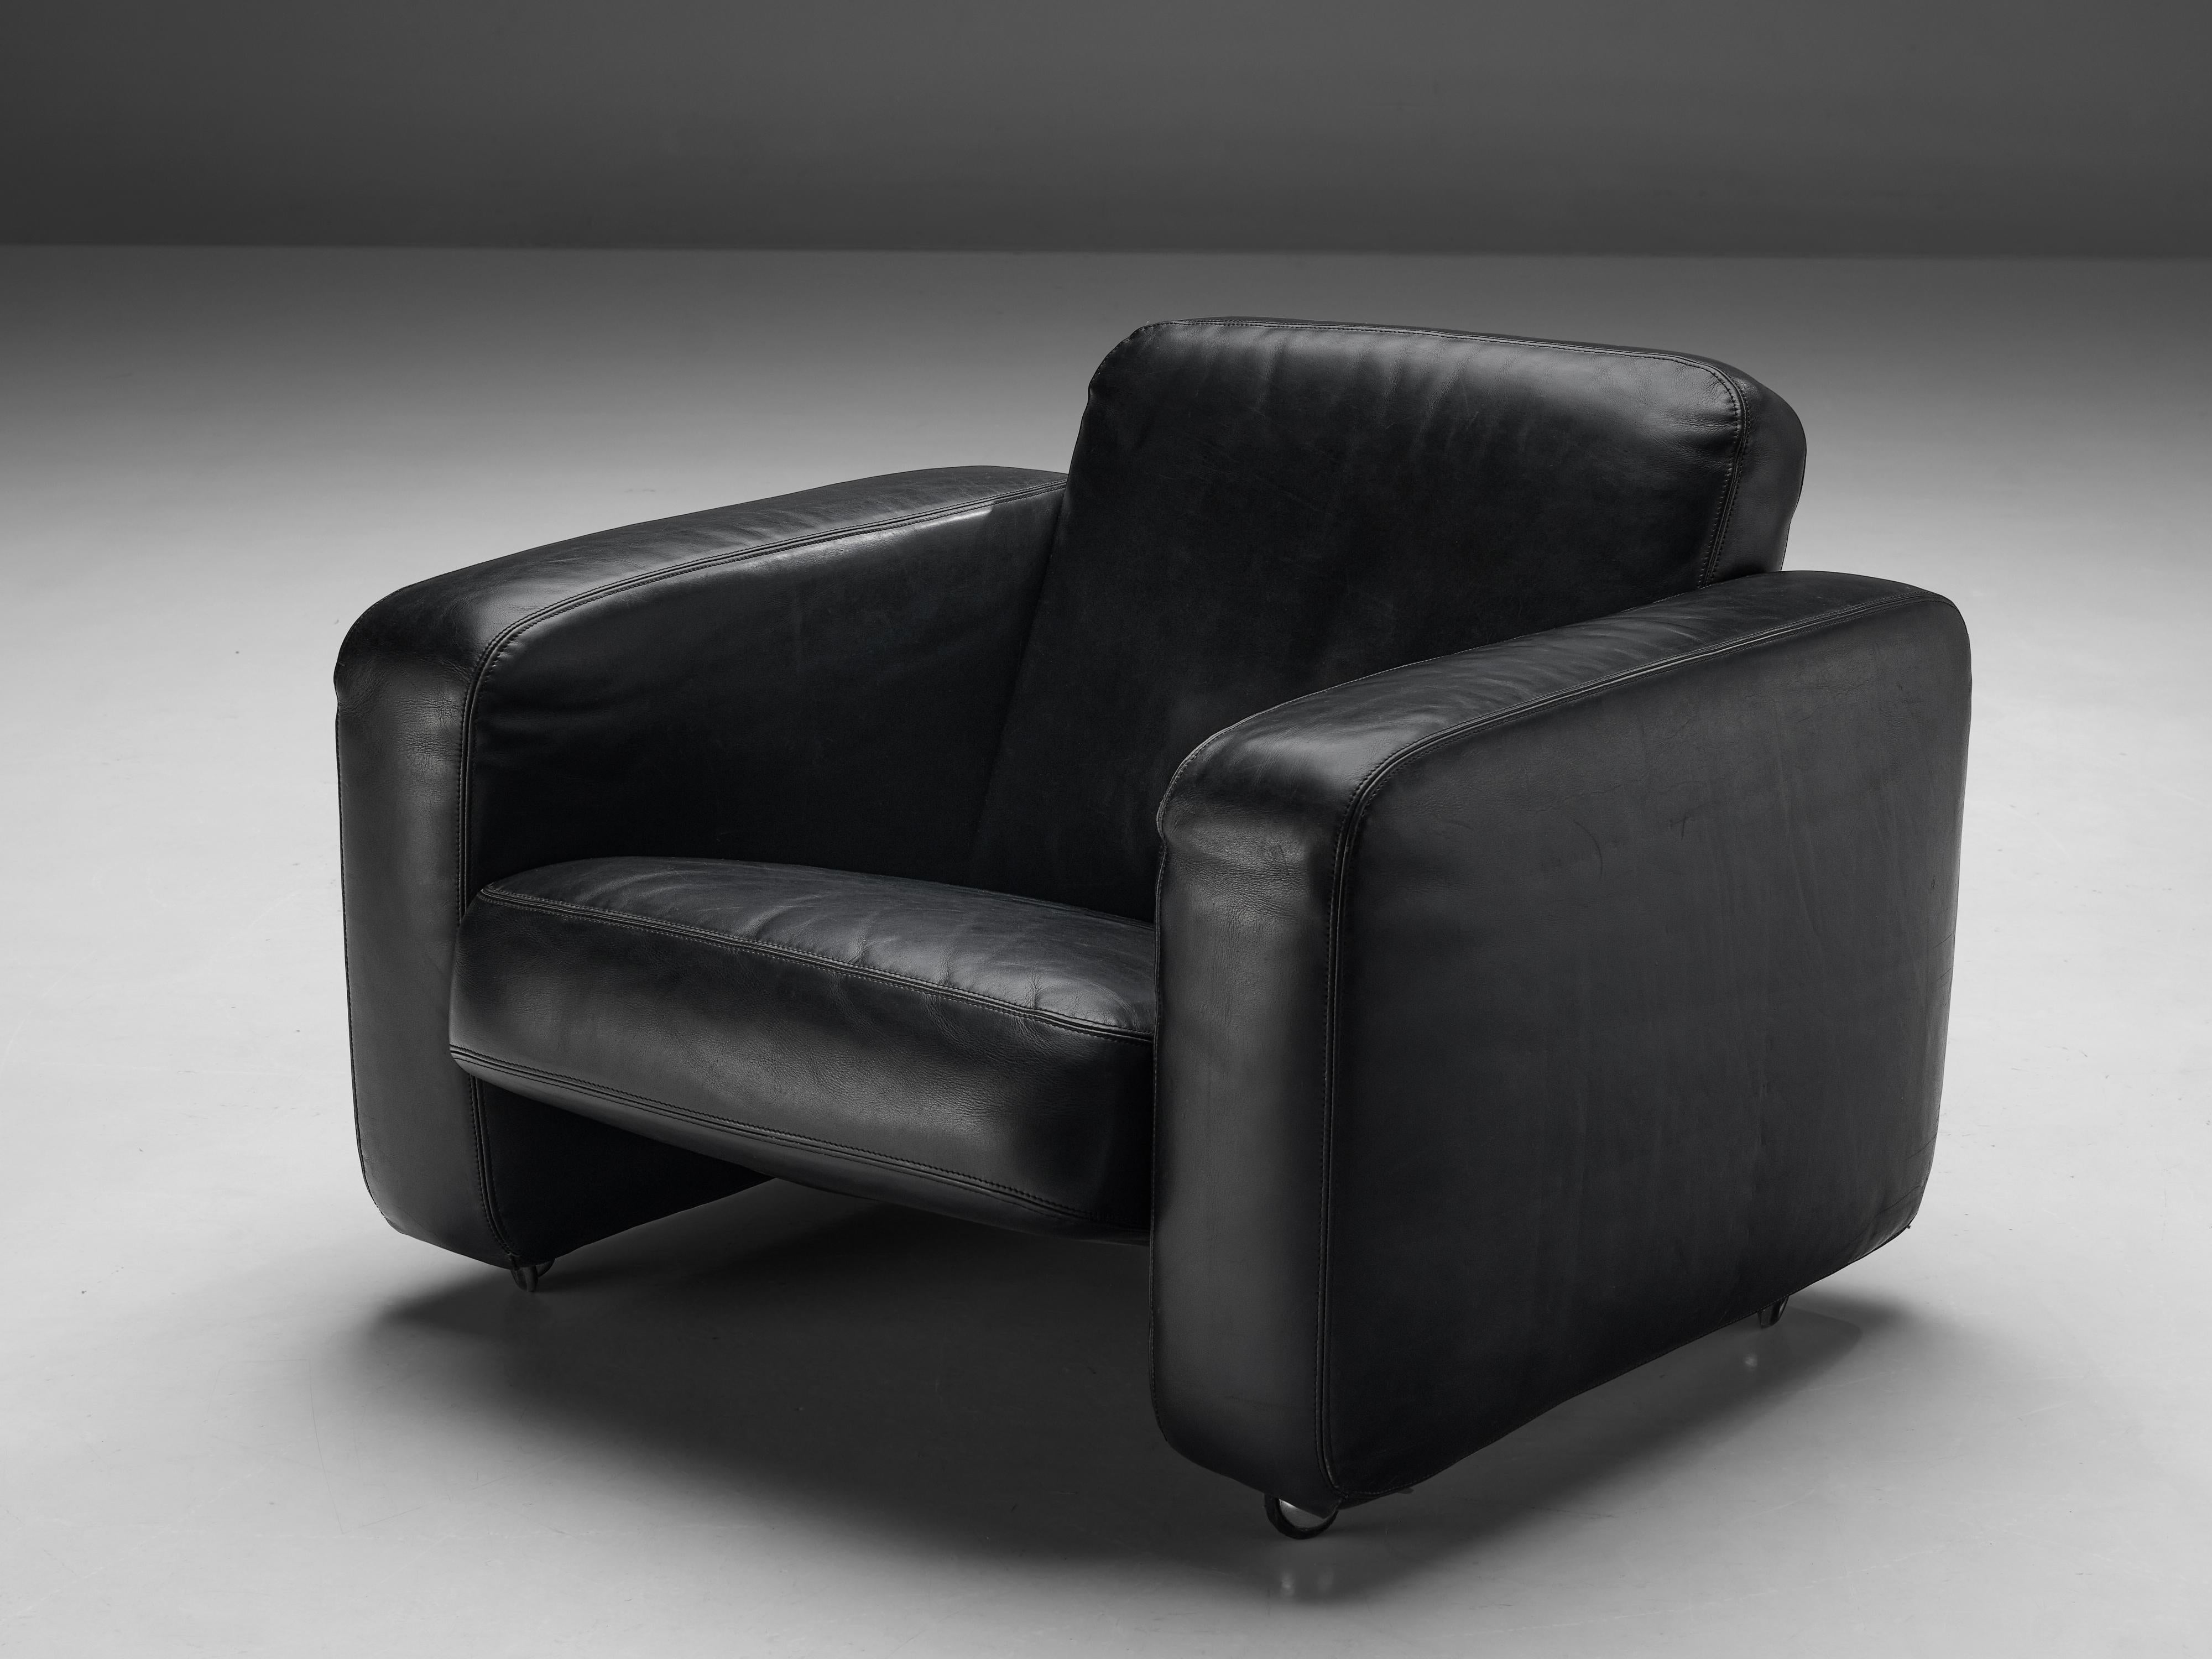 Lounge chair, leather, Italy, 1970s

This mobile lounge chair is completely covered in high quality, thick leather that patinated beautifully over the years. The round form of the cushions emphasize the softness of this design and its radiation of